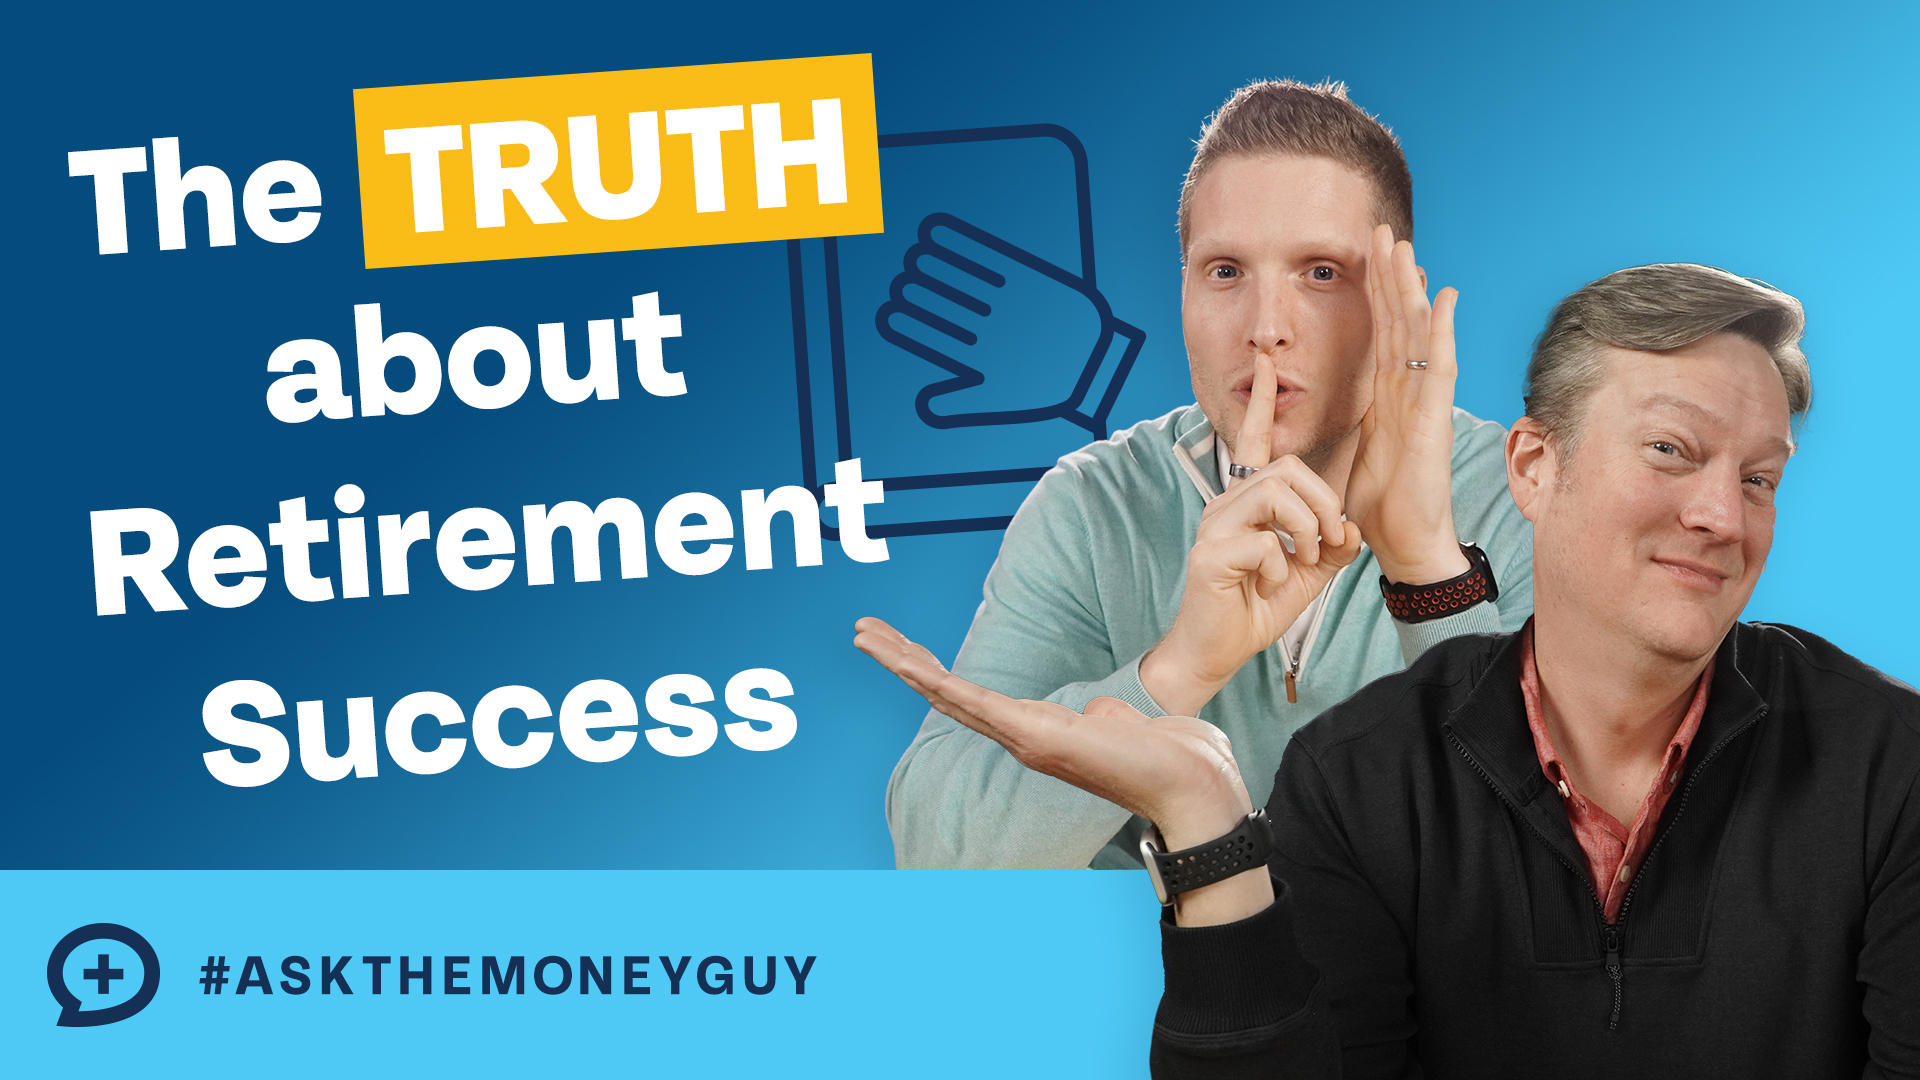 LIVE ASK TruthAboutRetirementSuccess